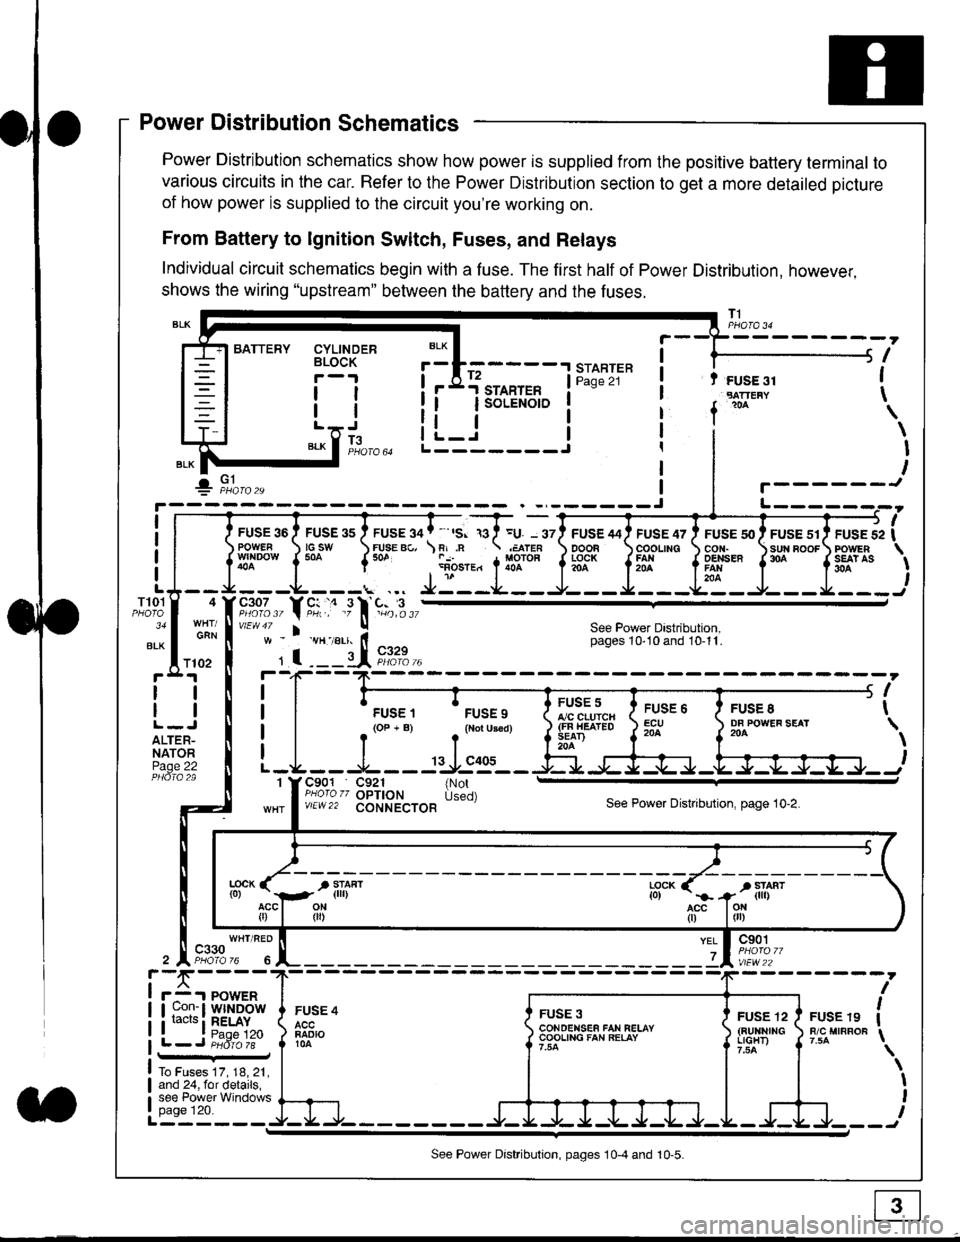 HONDA CIVIC 1998 6.G User Guide Power Distribution Schematics
Power Distribution schematics show how power is supplied from the positive battery terminal to
various circuits in the car. Refer to the Power Distribution section to get